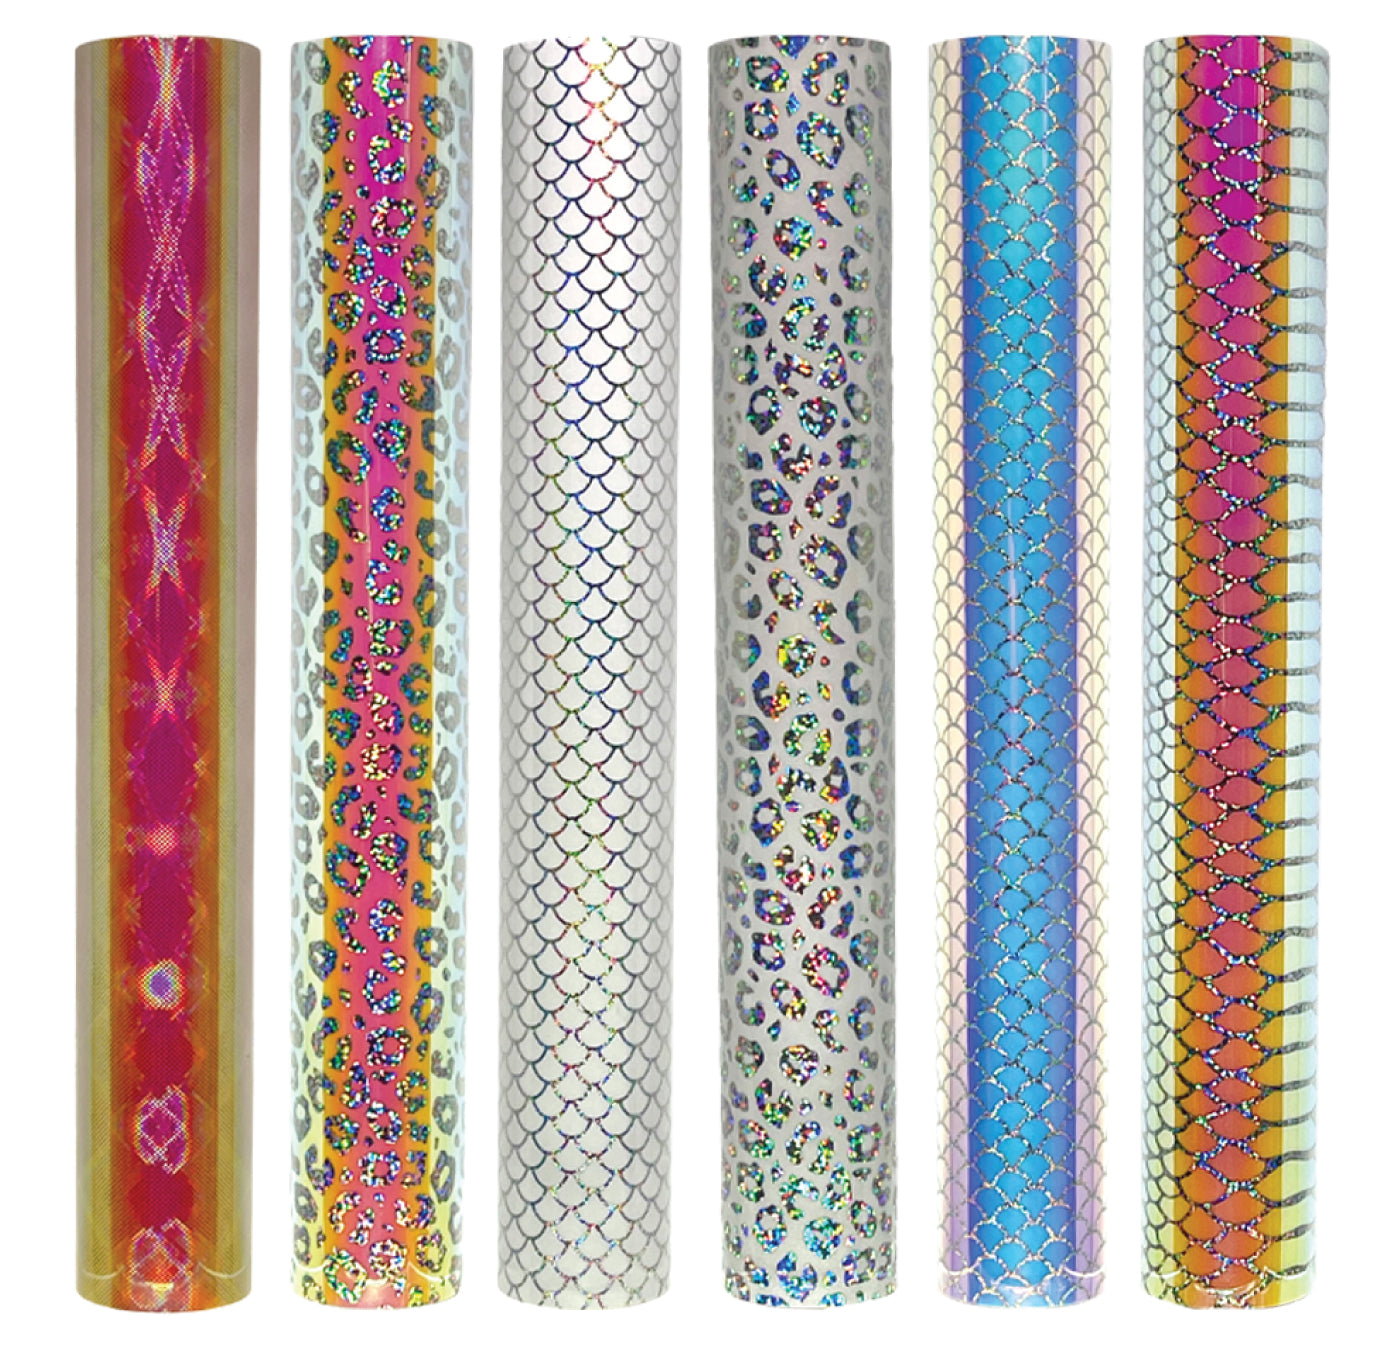 Mermaid Pattern Holographic Adhesive Vinyl Rolls By Craftables